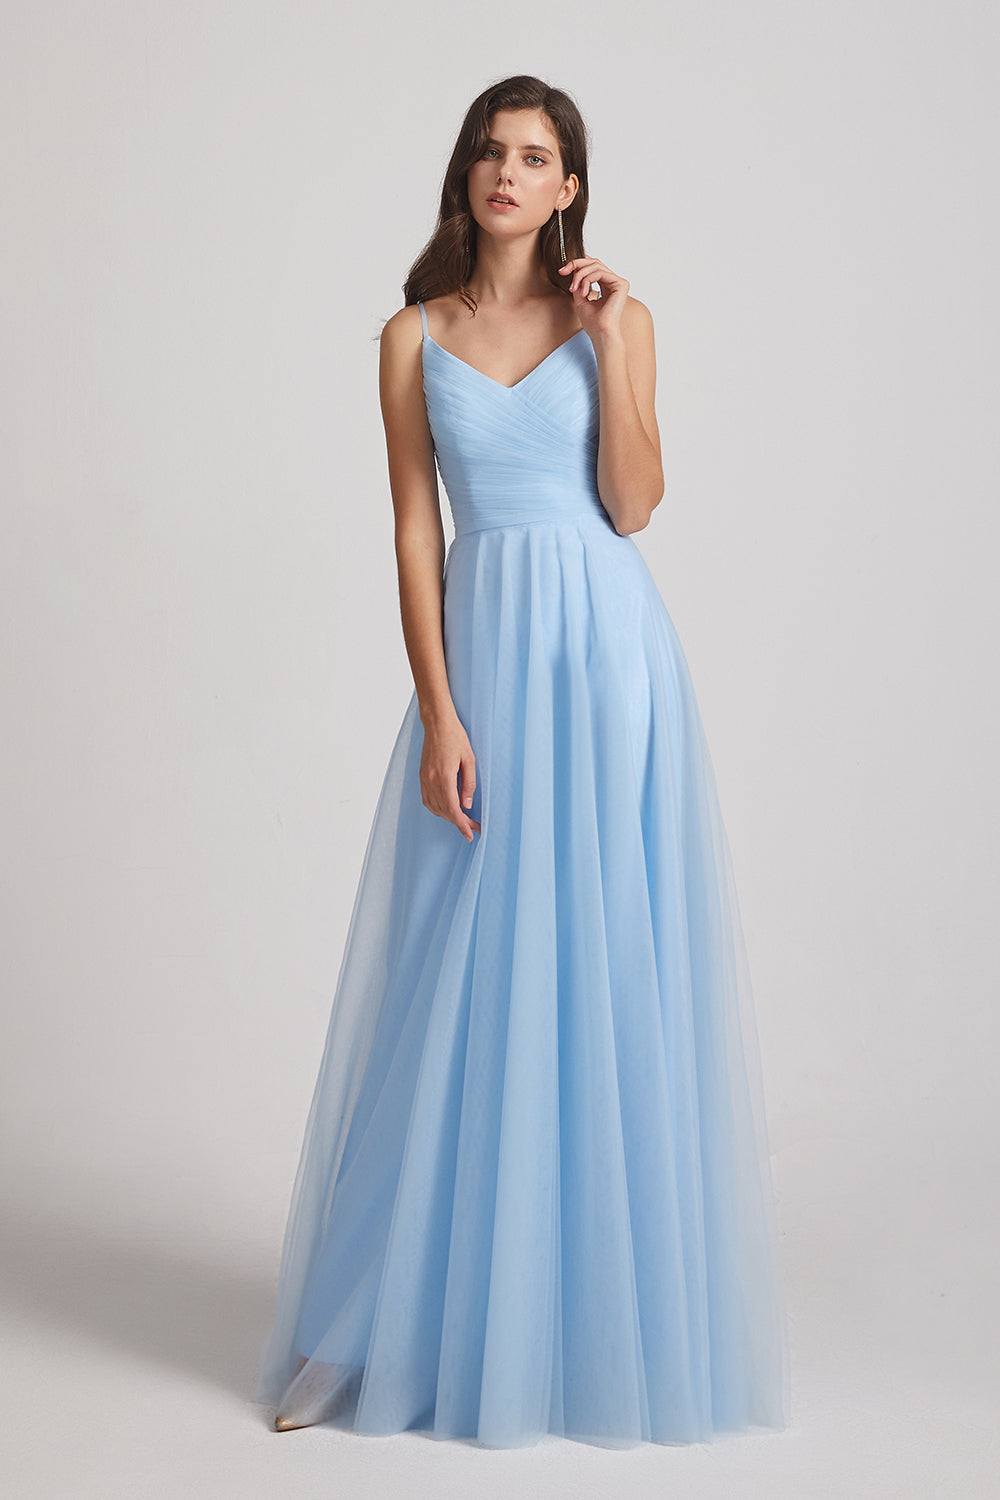 ruffles tulle a-line maid of honor dress